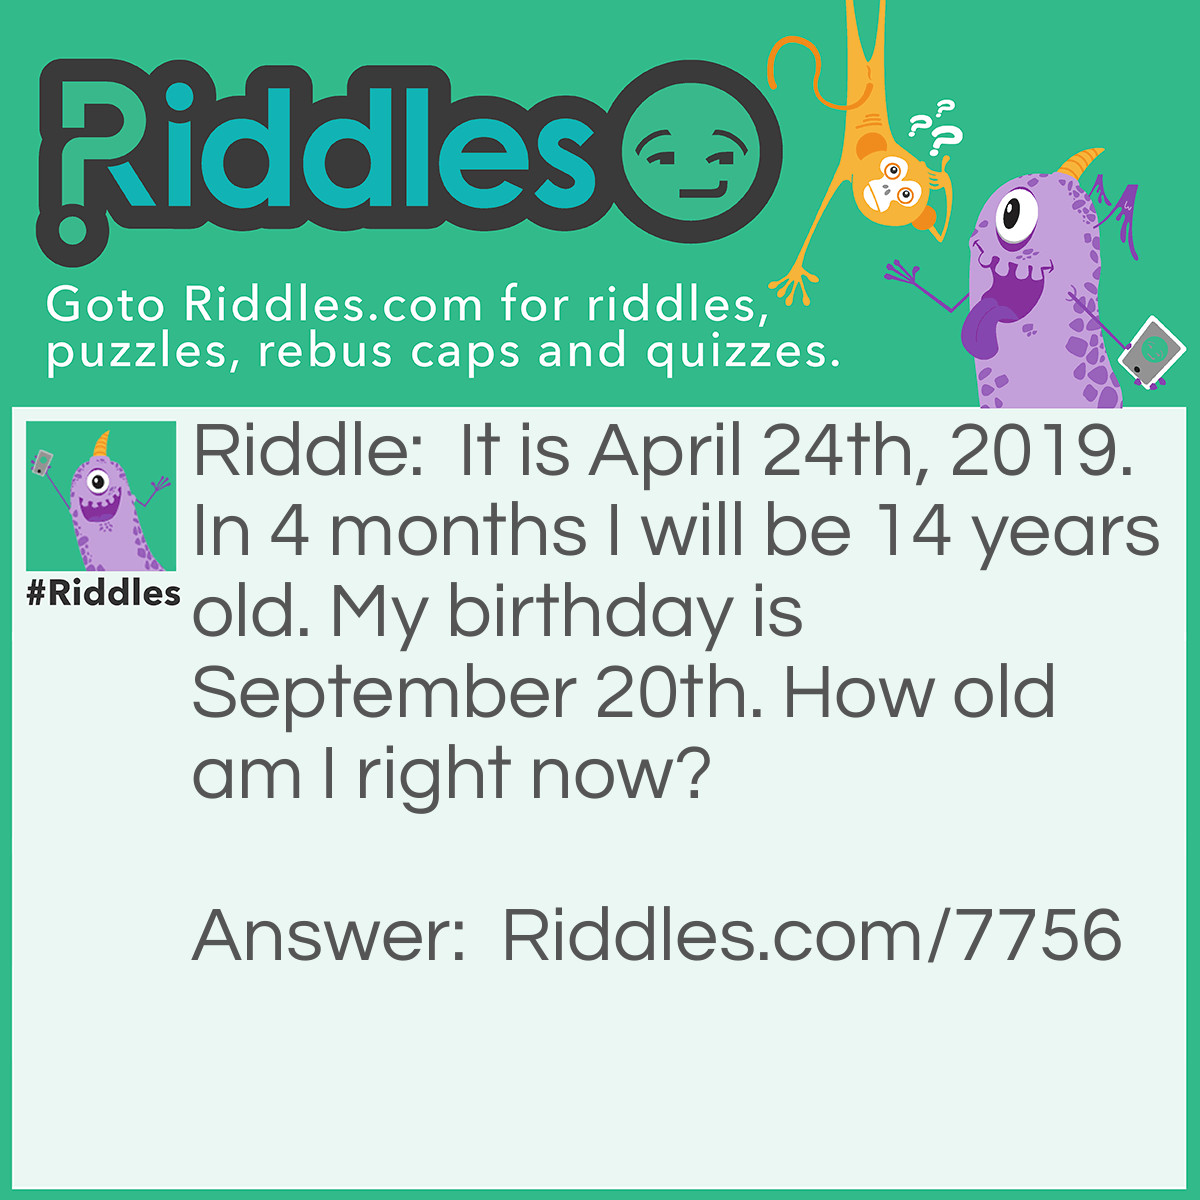 Riddle: It is April 24th, 2019. In 4 months I will be 14 years old. My birthday is September 20th. How old am I right now? Answer: I am 14 years old. I never said I will be turning 14, did I? 4 months later, it will be August 24th, which is not September 20th. I will turn 15 in September.